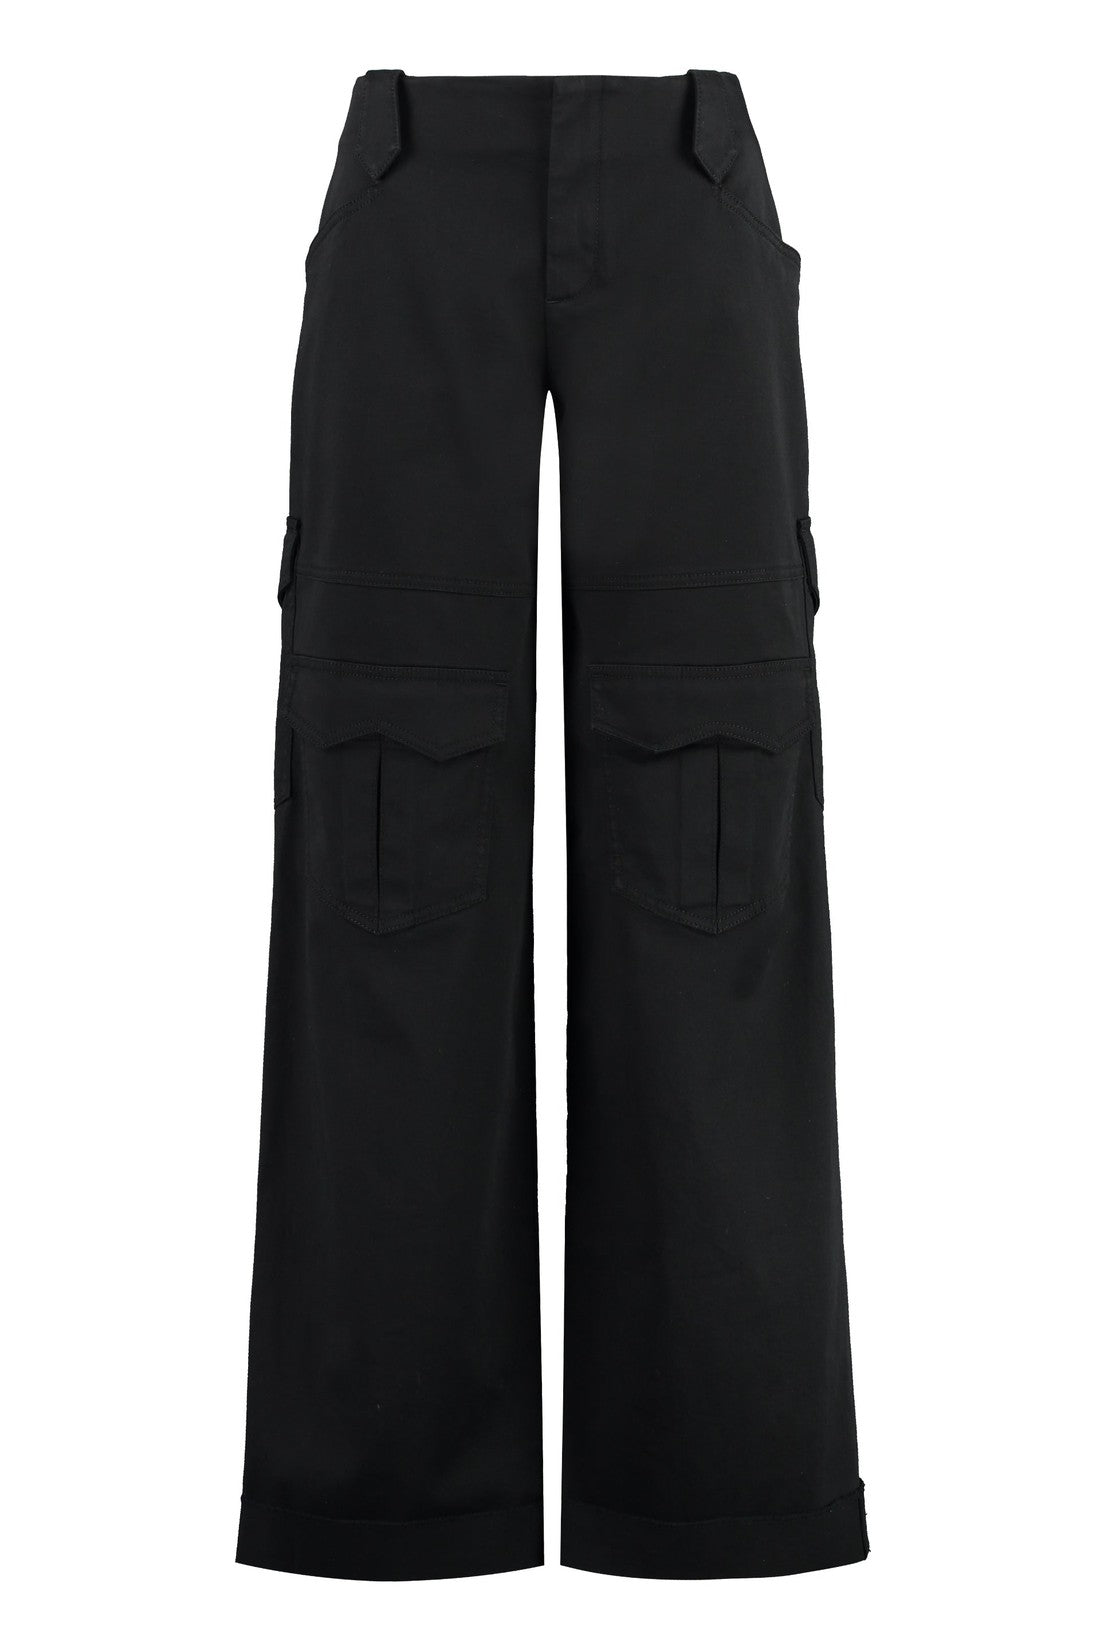 Tom Ford OUTLET, Gabardine cargo trousers im SALE